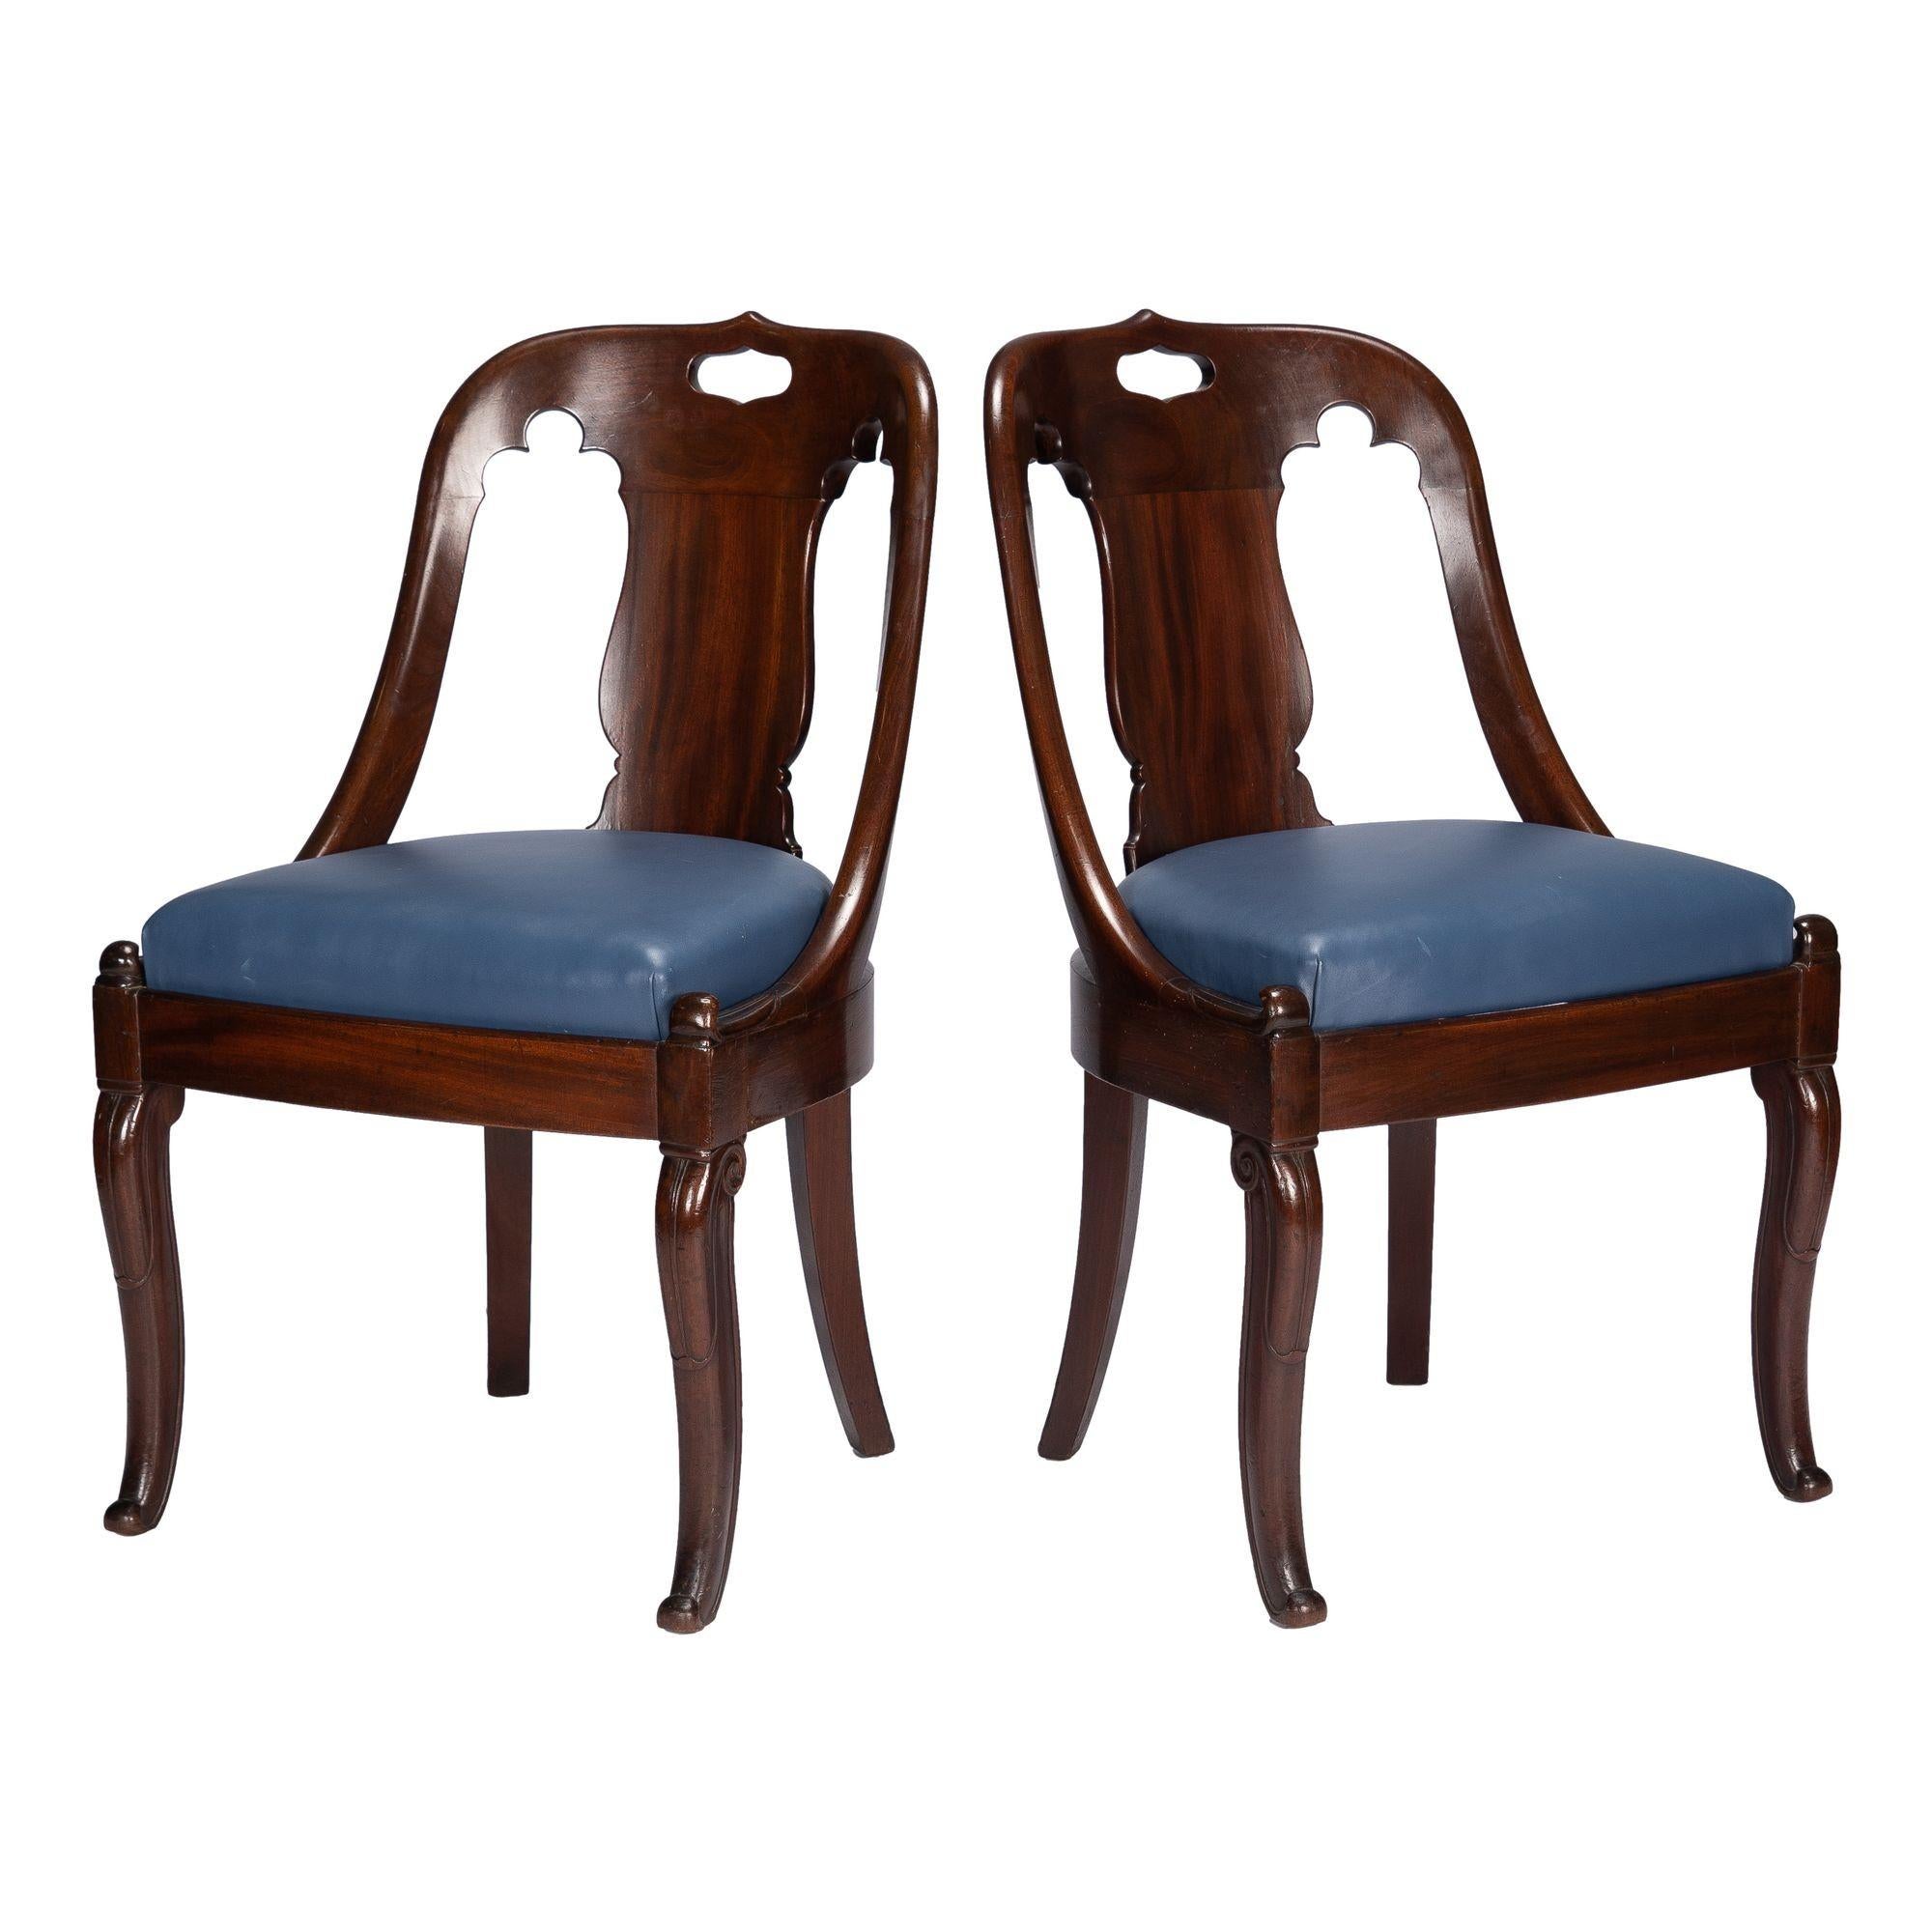 Pair of Charles X period, French Restoration, mahogany “chaise en gondole” chairs with leather upholstered boxed slip seats. The chair backs have a single vertical urn silhouette back splat below a crest rail pierced with a handle grip. The chair